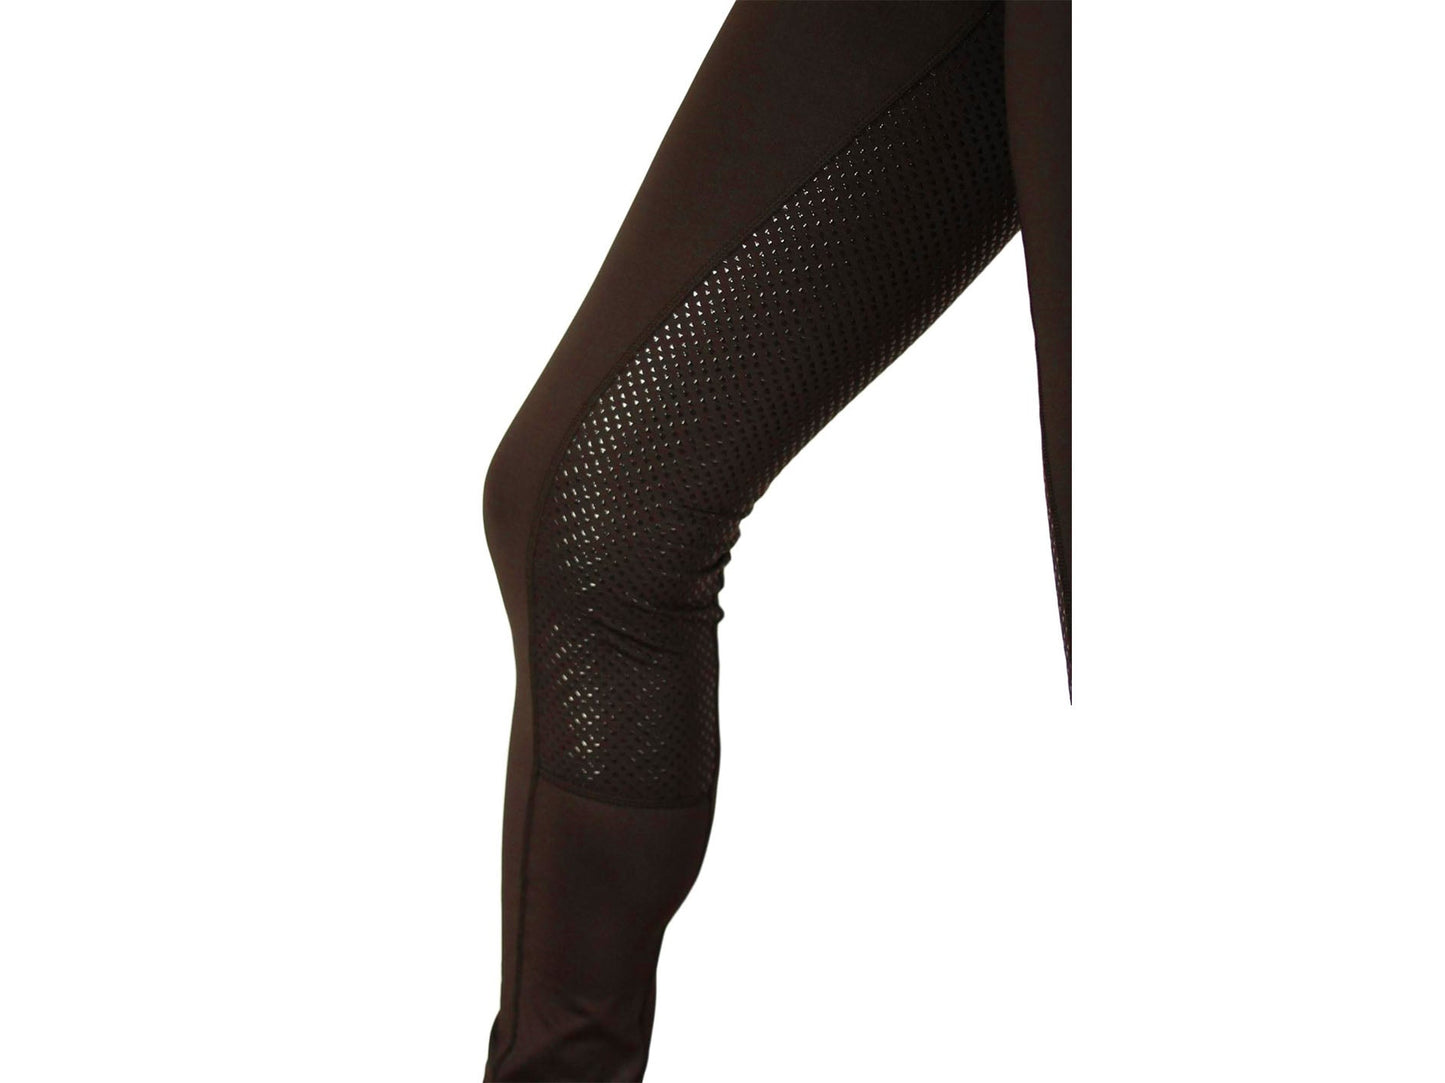 Black horse riding tights with a mesh pattern on the thigh.